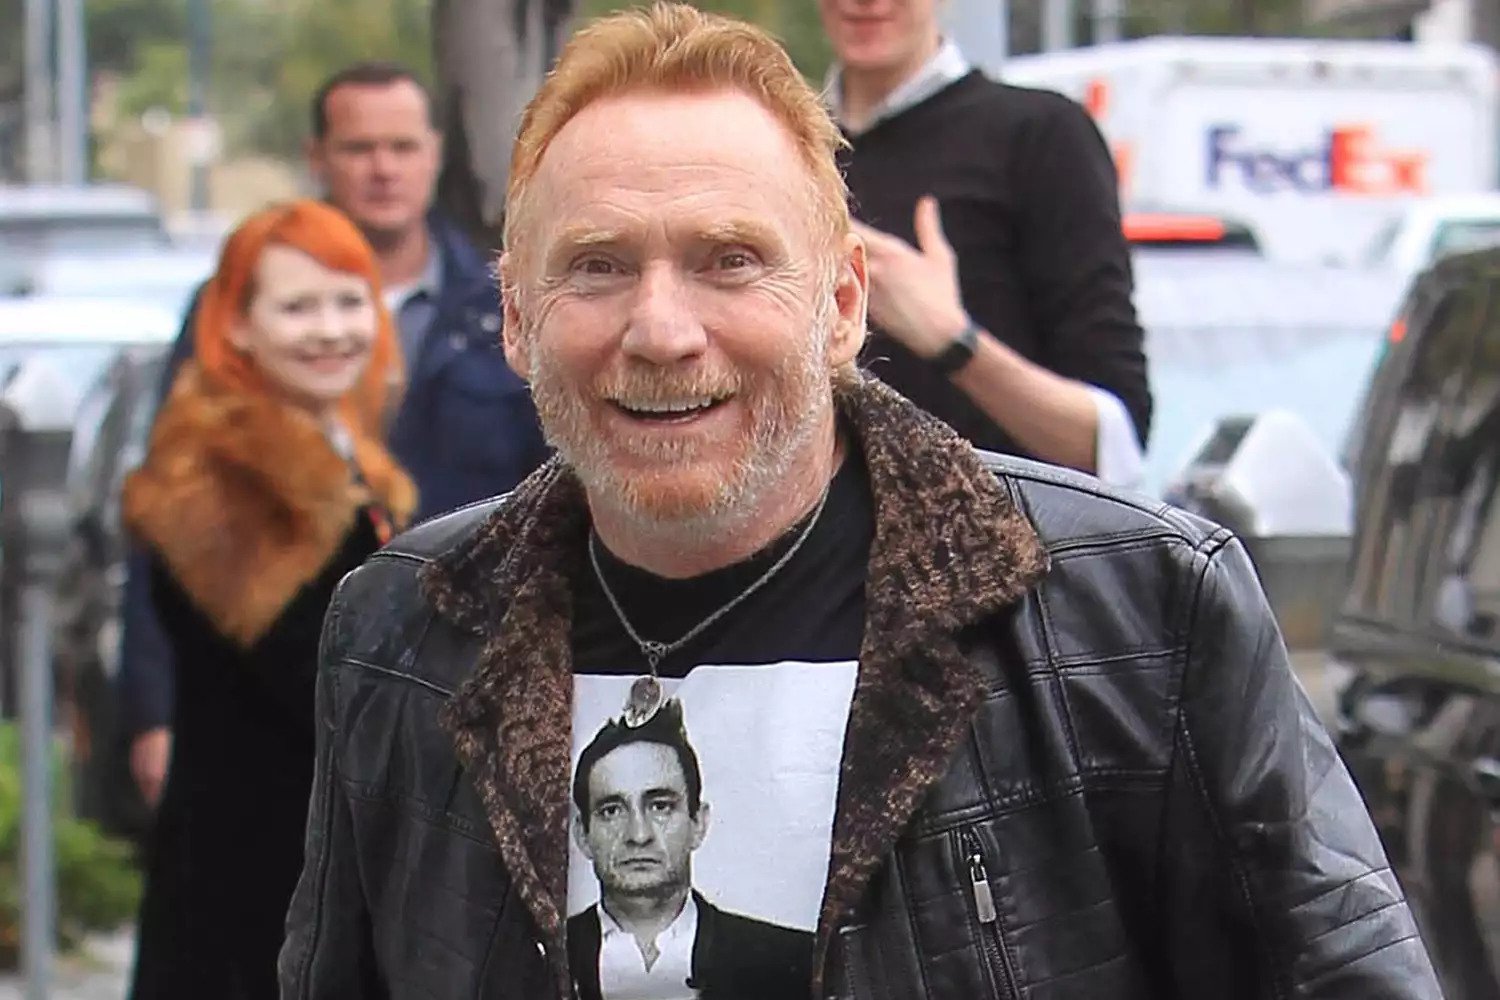 Danny Bonaduce Successfully Undergoes Brain Surgery, Sets Path to Recovery and Selling Seattle Home  